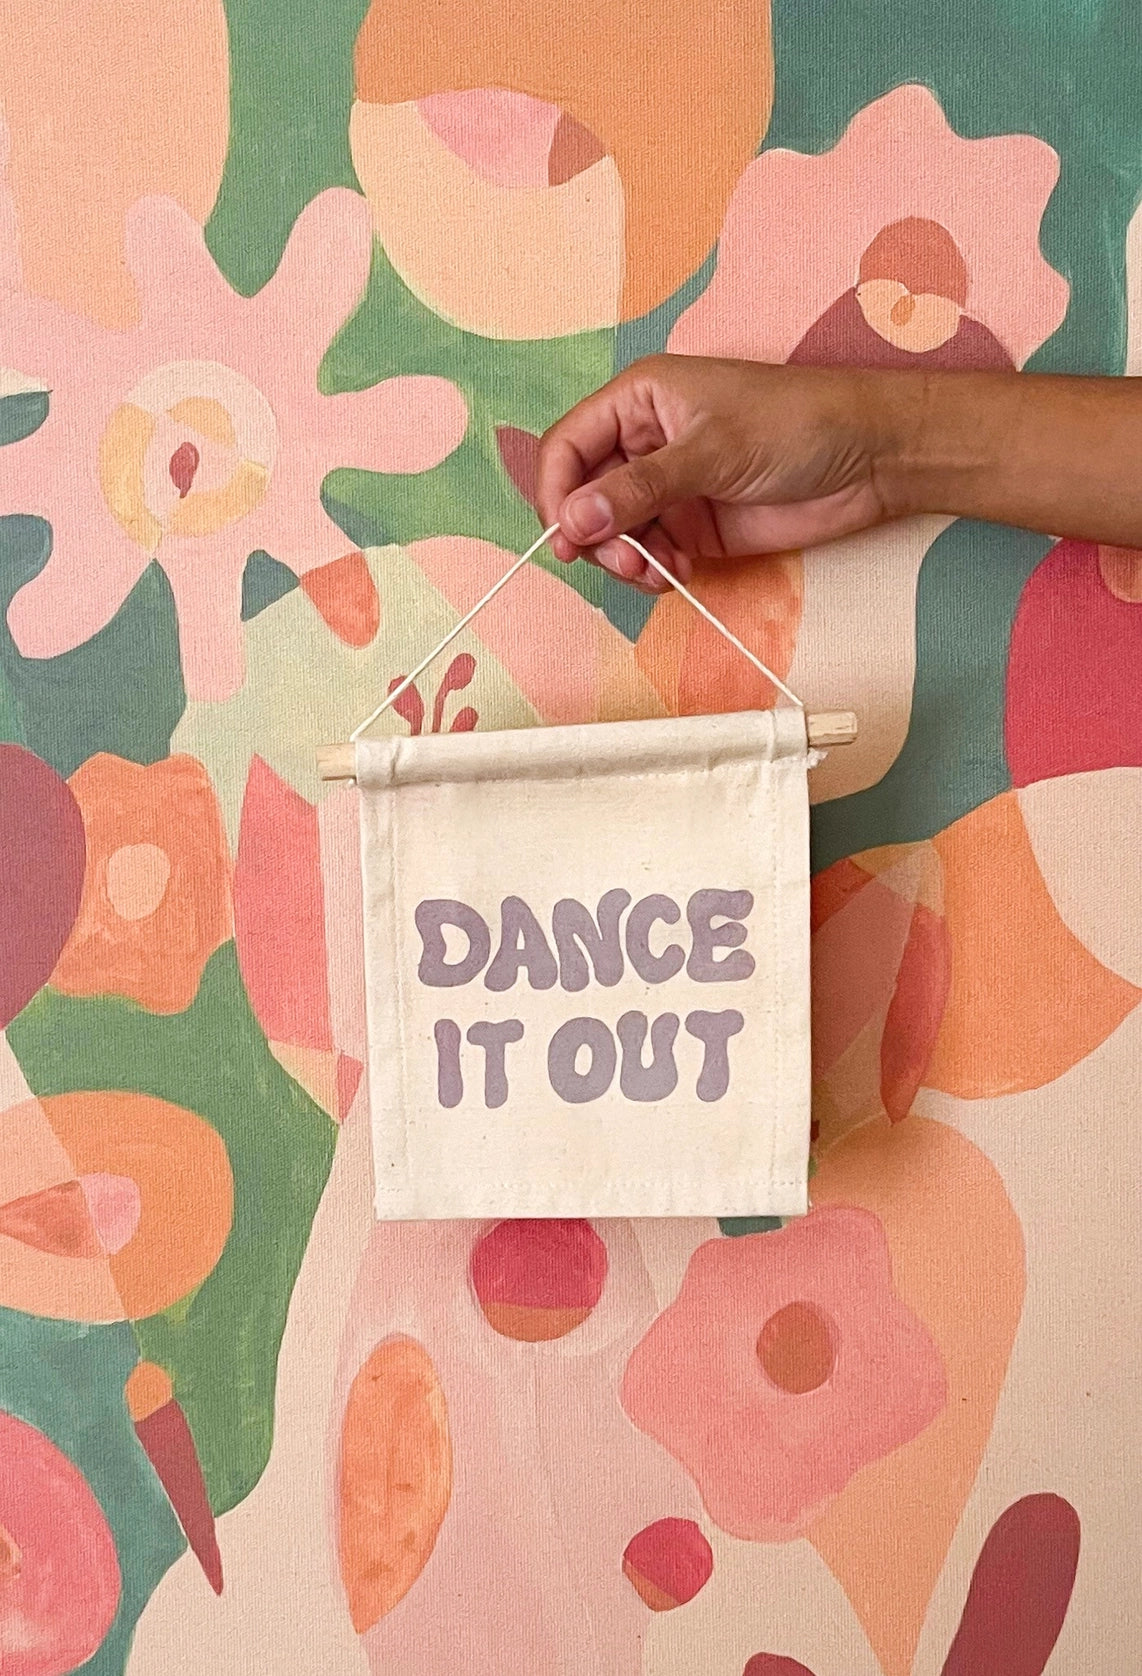 Dance It Out Canvas Hang Sign